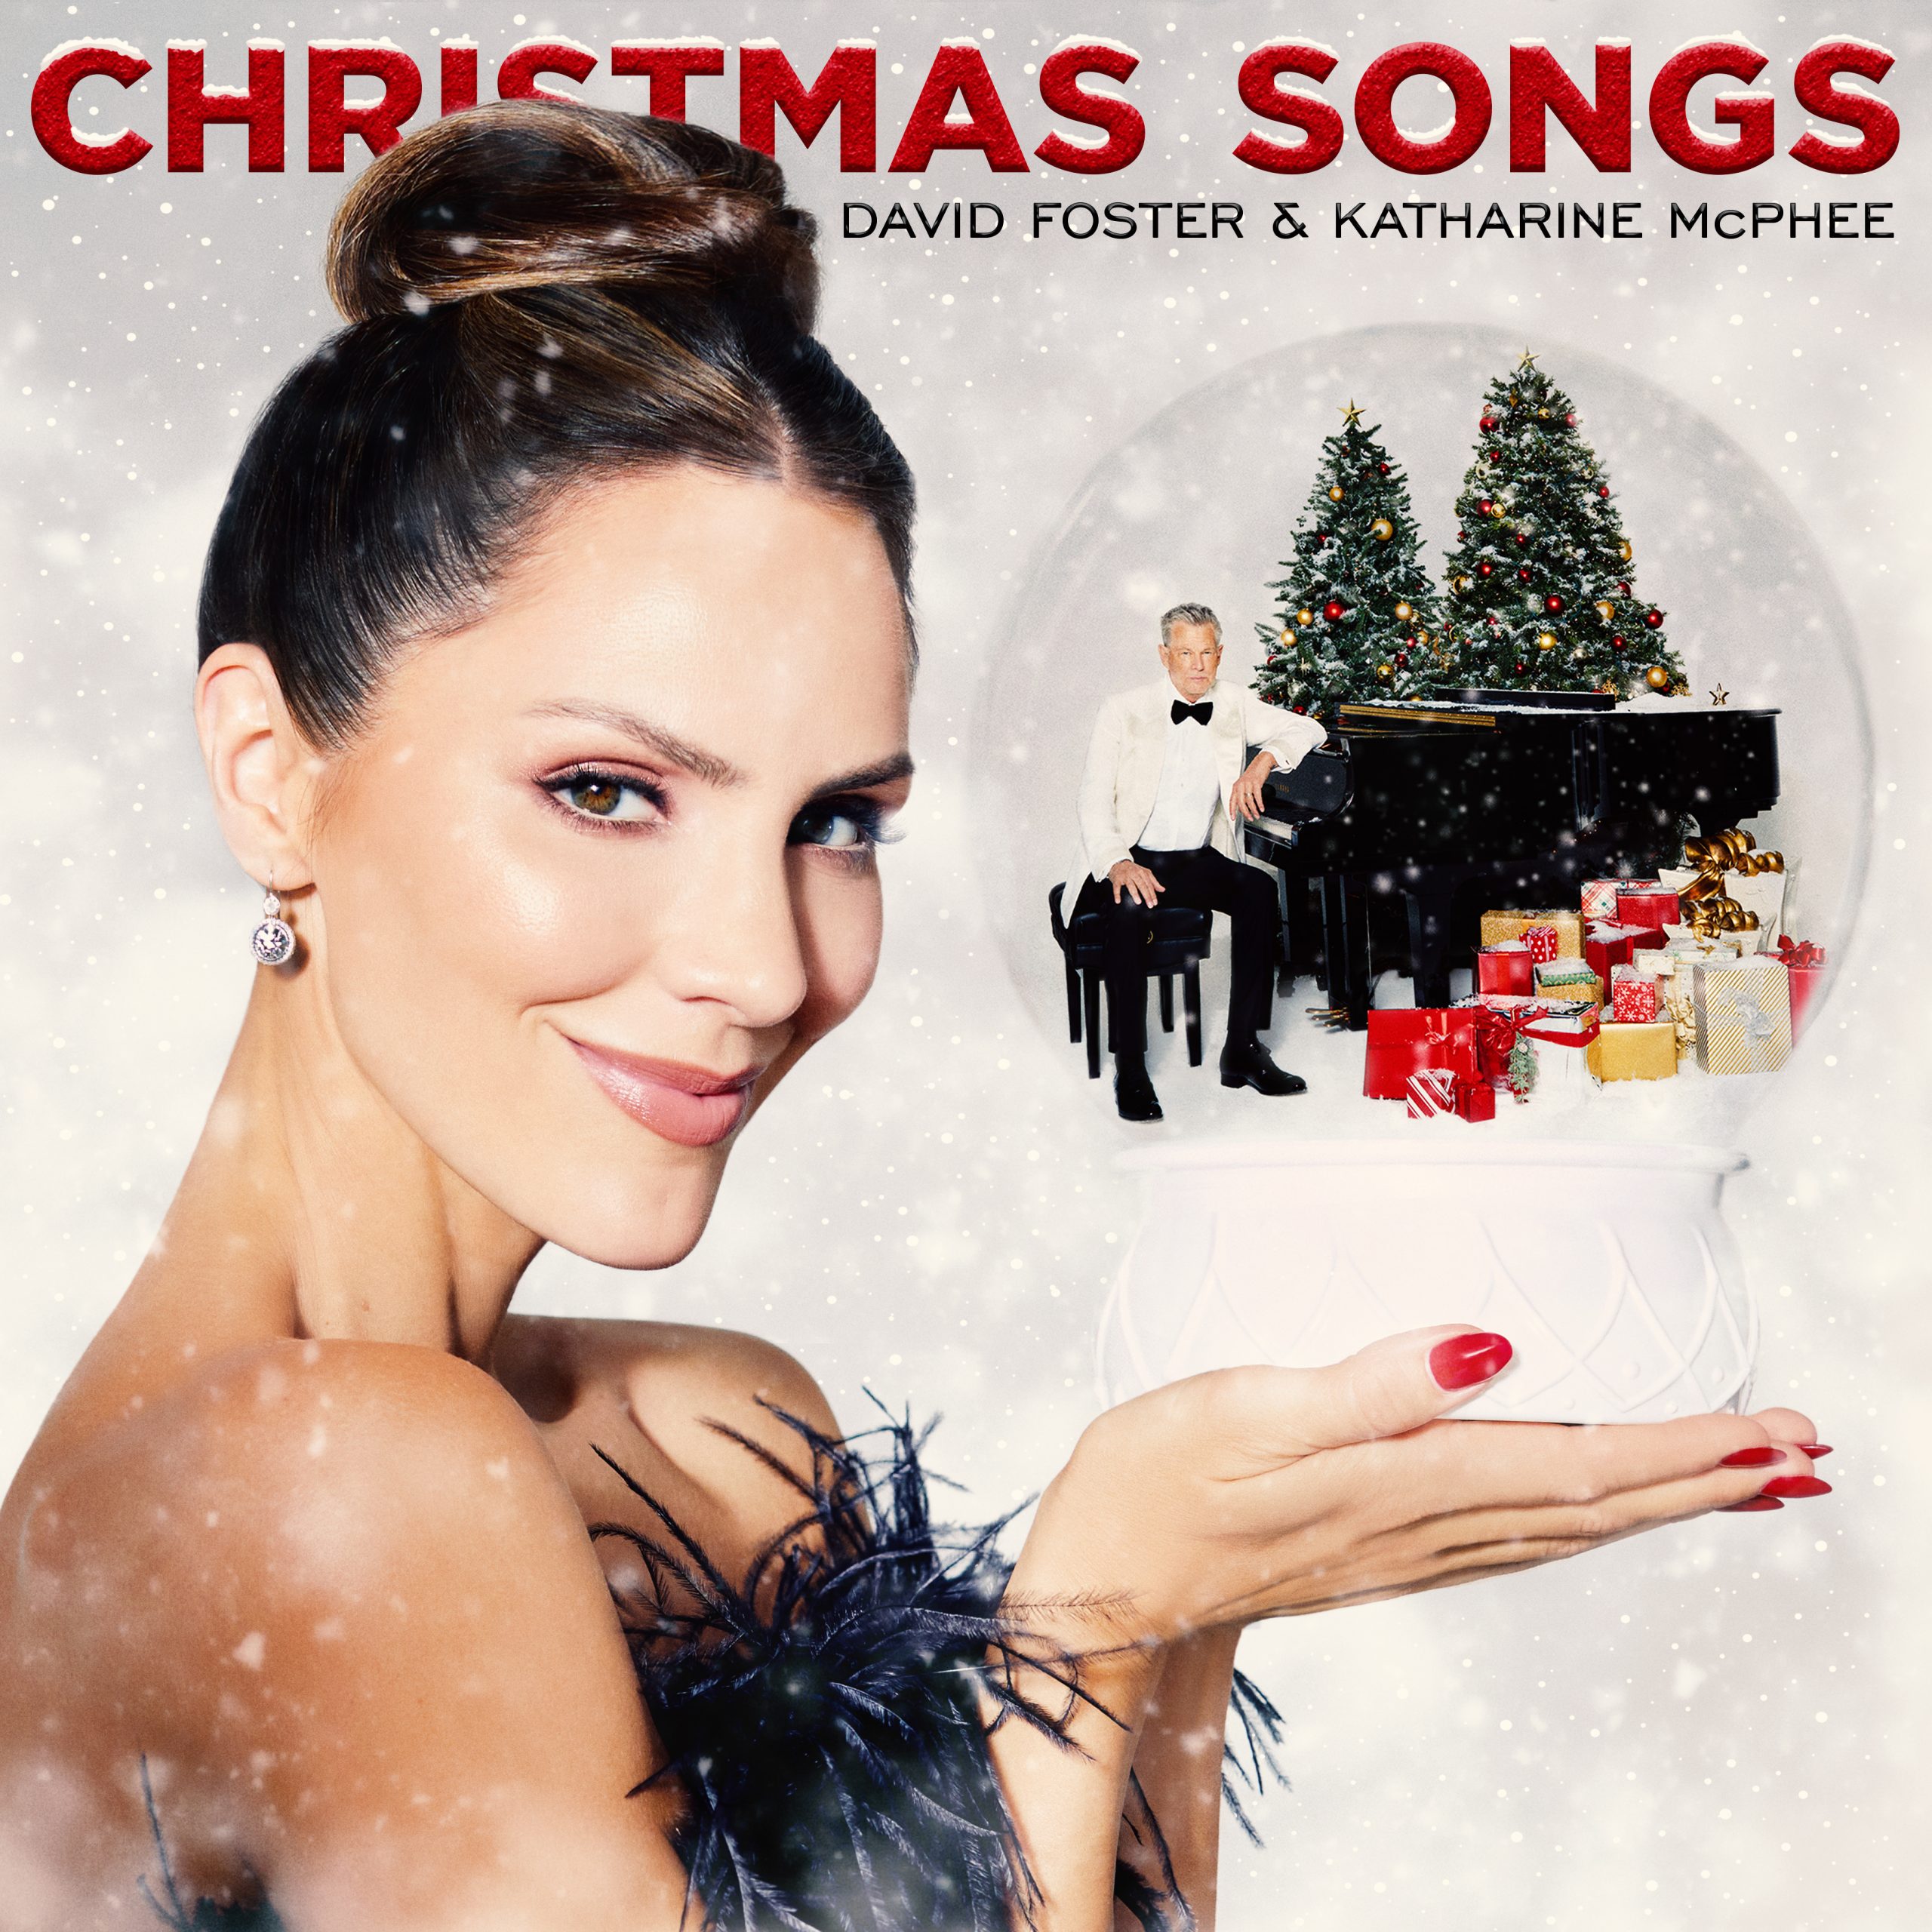 foster_christmassongs_cover_final